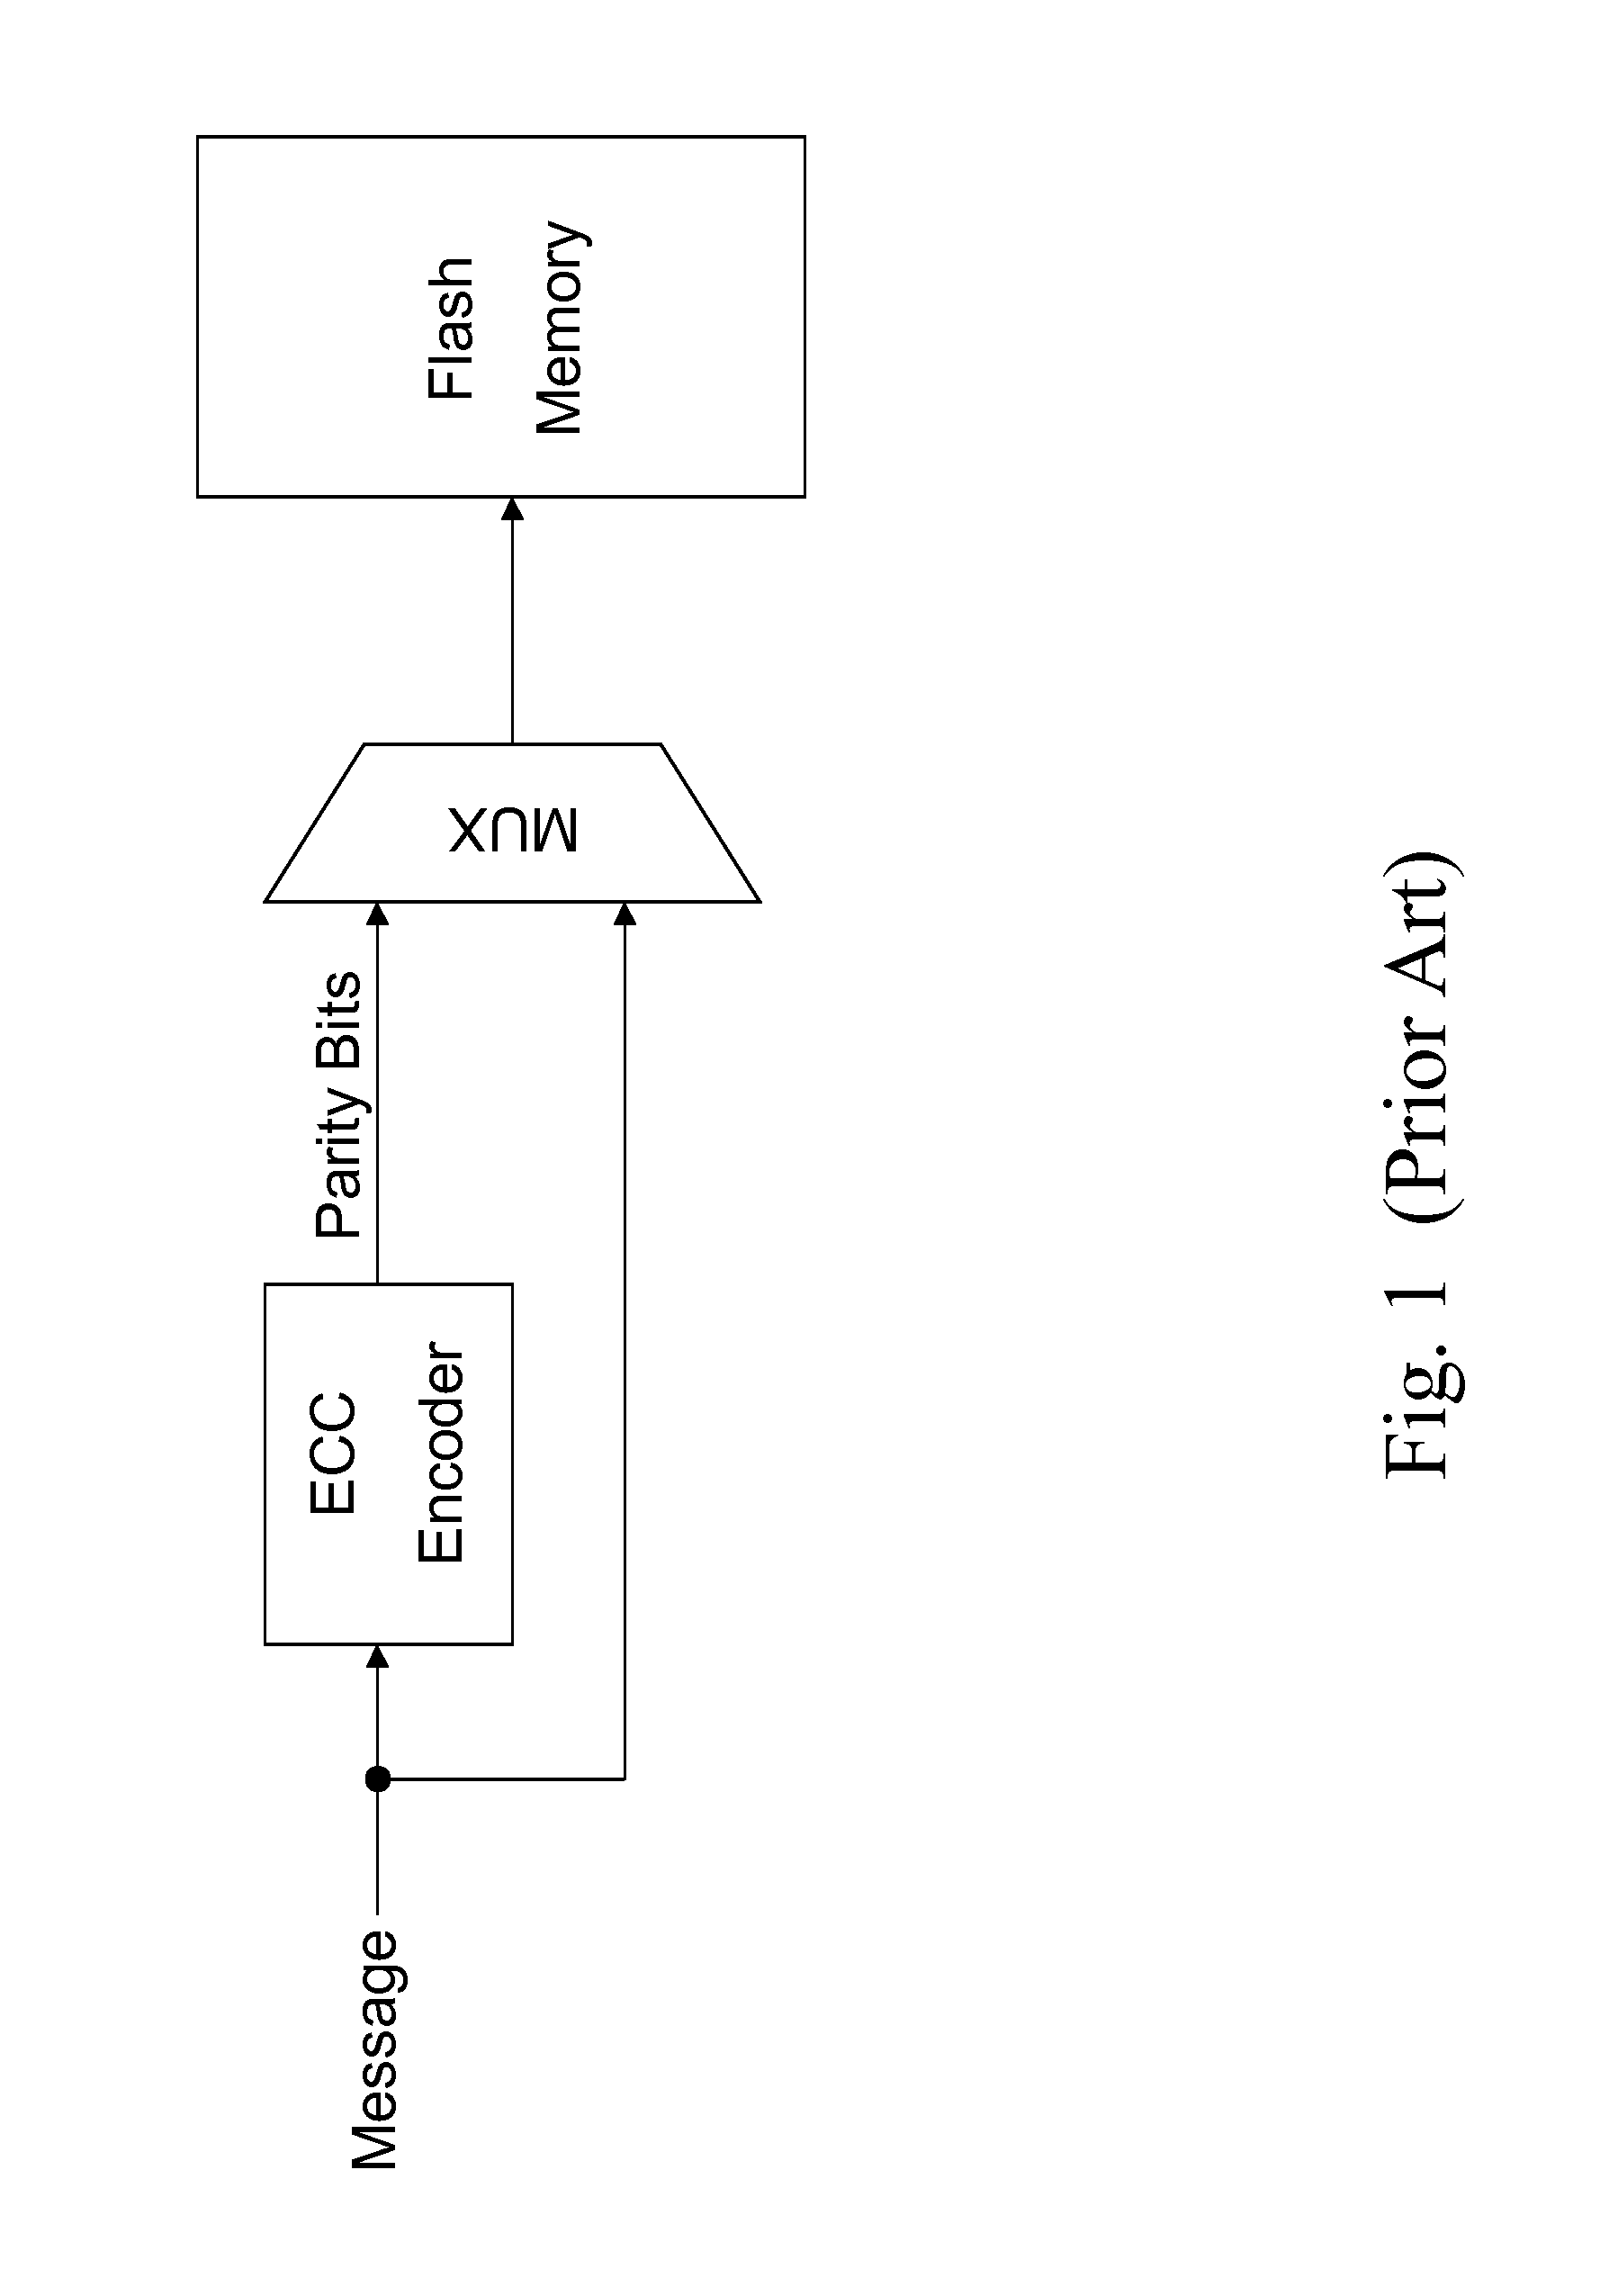 Data format with ecc information for on-the-fly decoding during data transfer and method for forming the data format